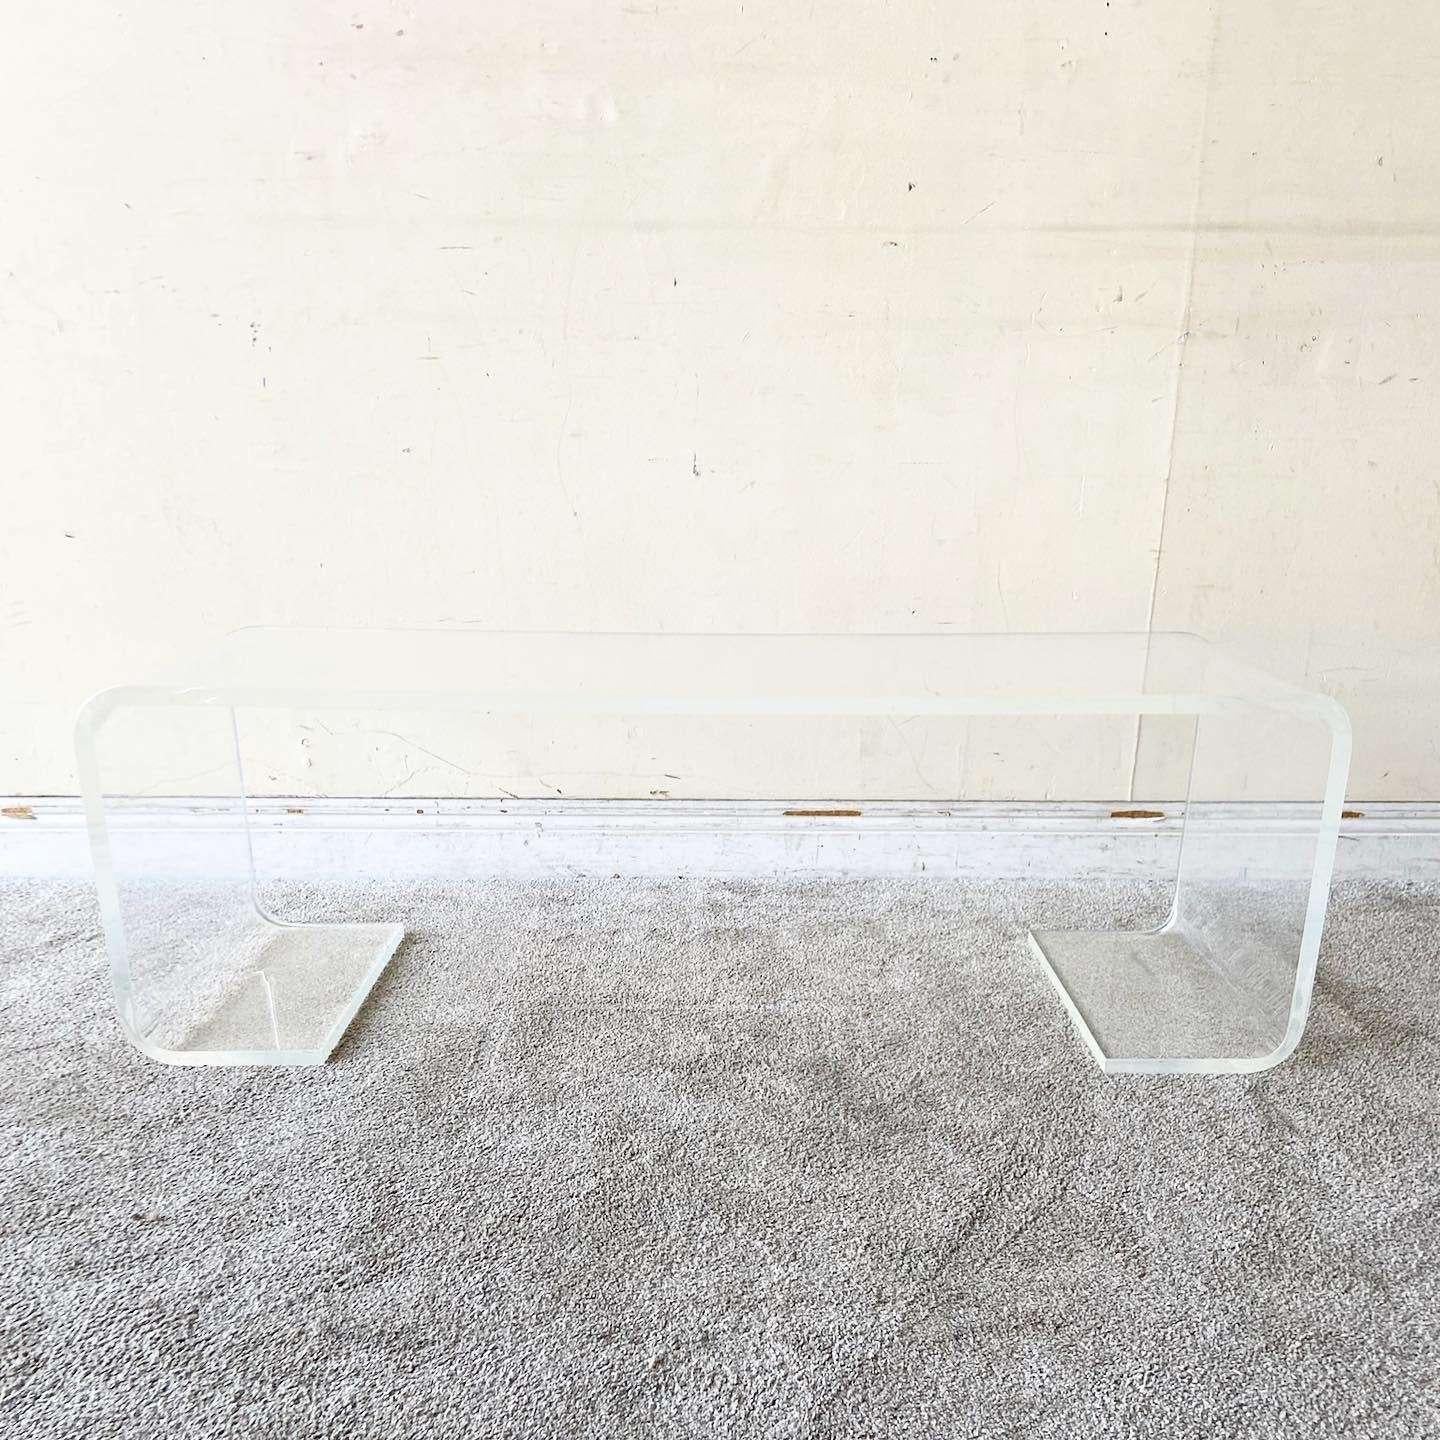 Wonderful vintage lucite scroll coffee table. Features double waterfall edges and a thin rectangular shape.